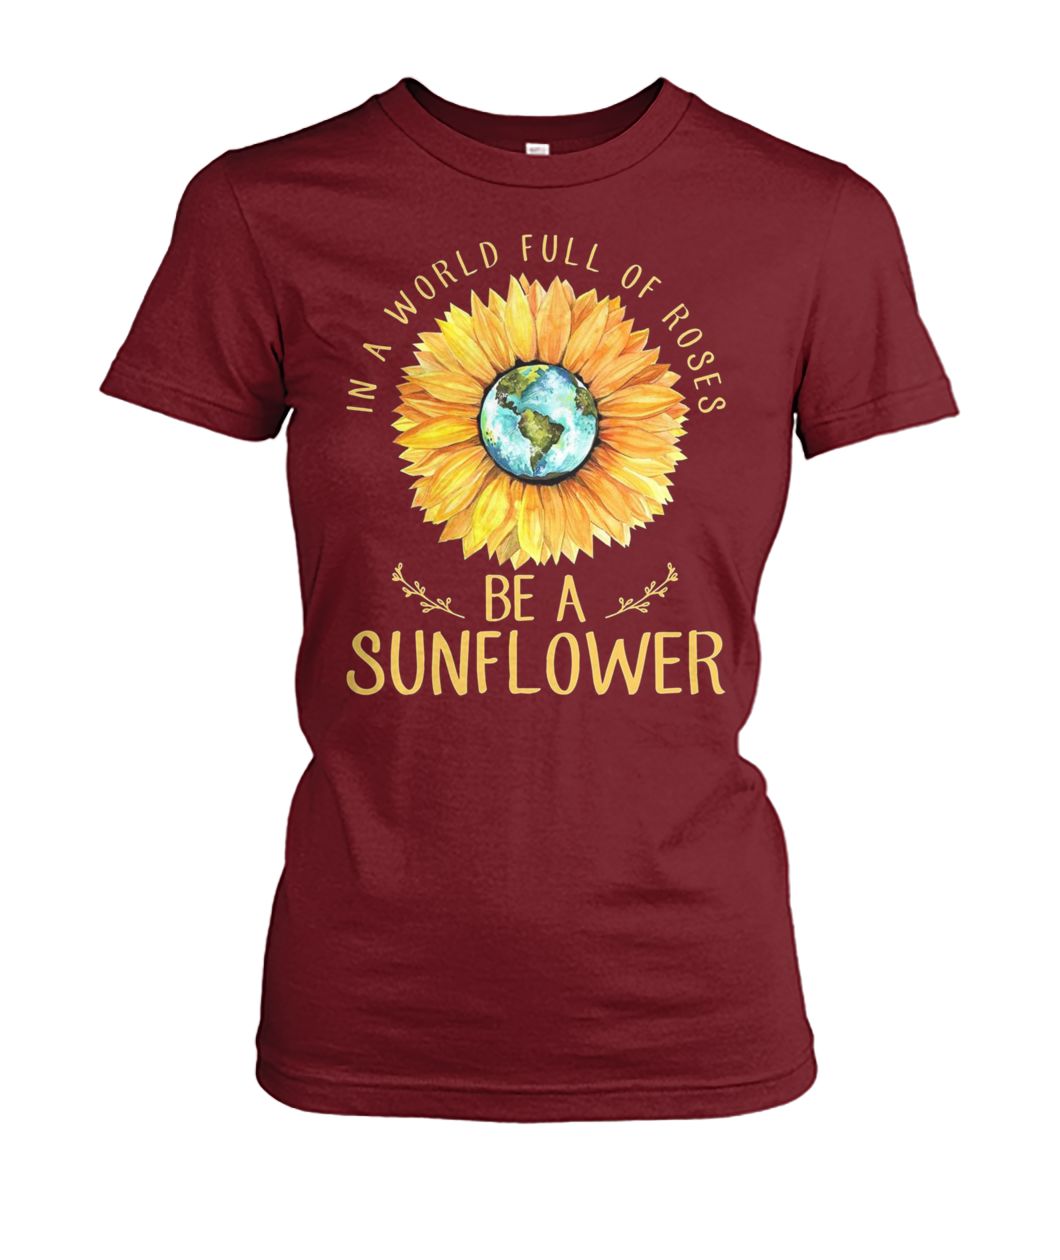 In a world full of roses be a sunflower earth women's crew tee